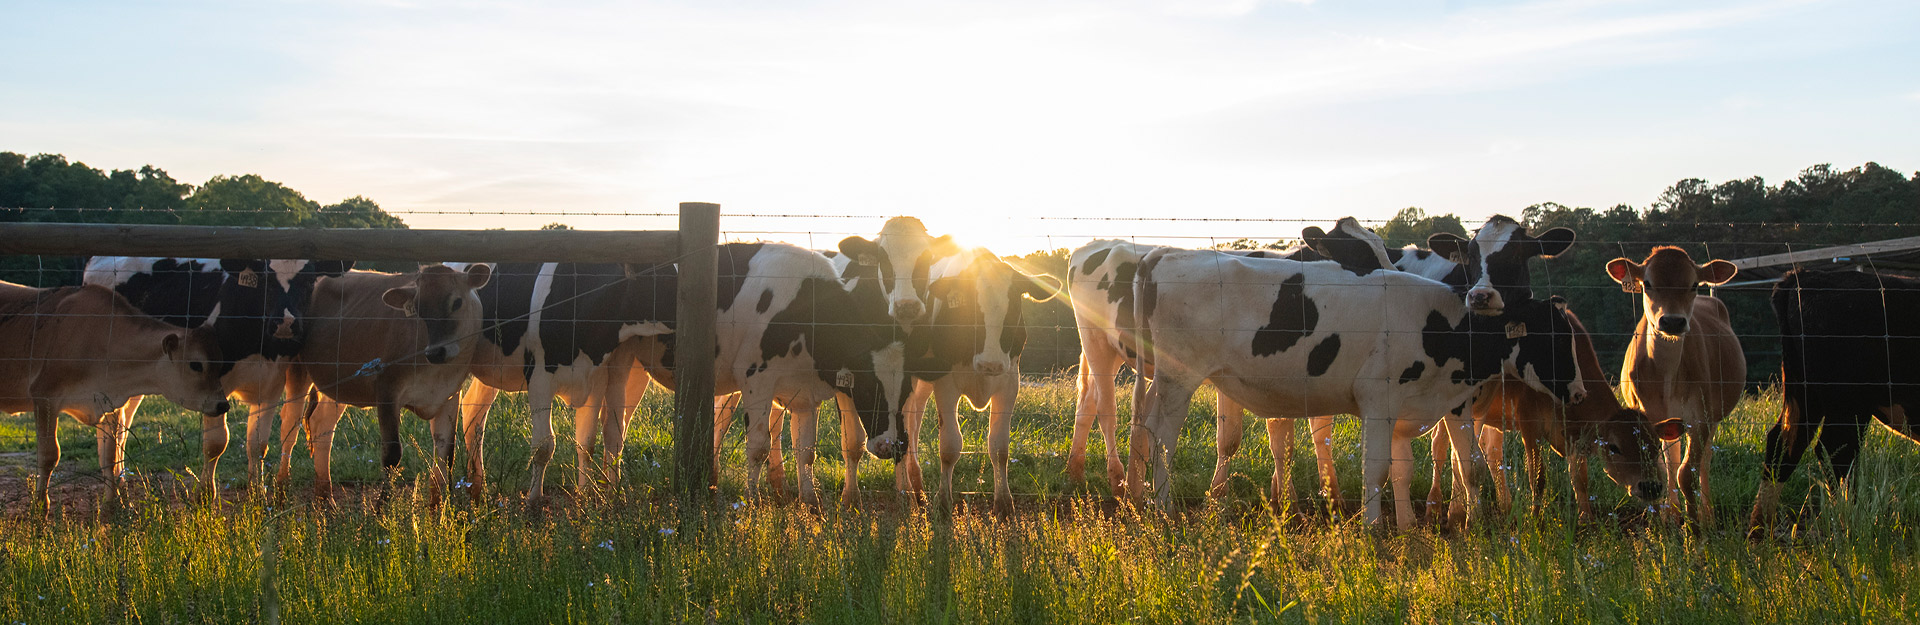 Cows in a field at sunset at Lamaster Dairy Center.